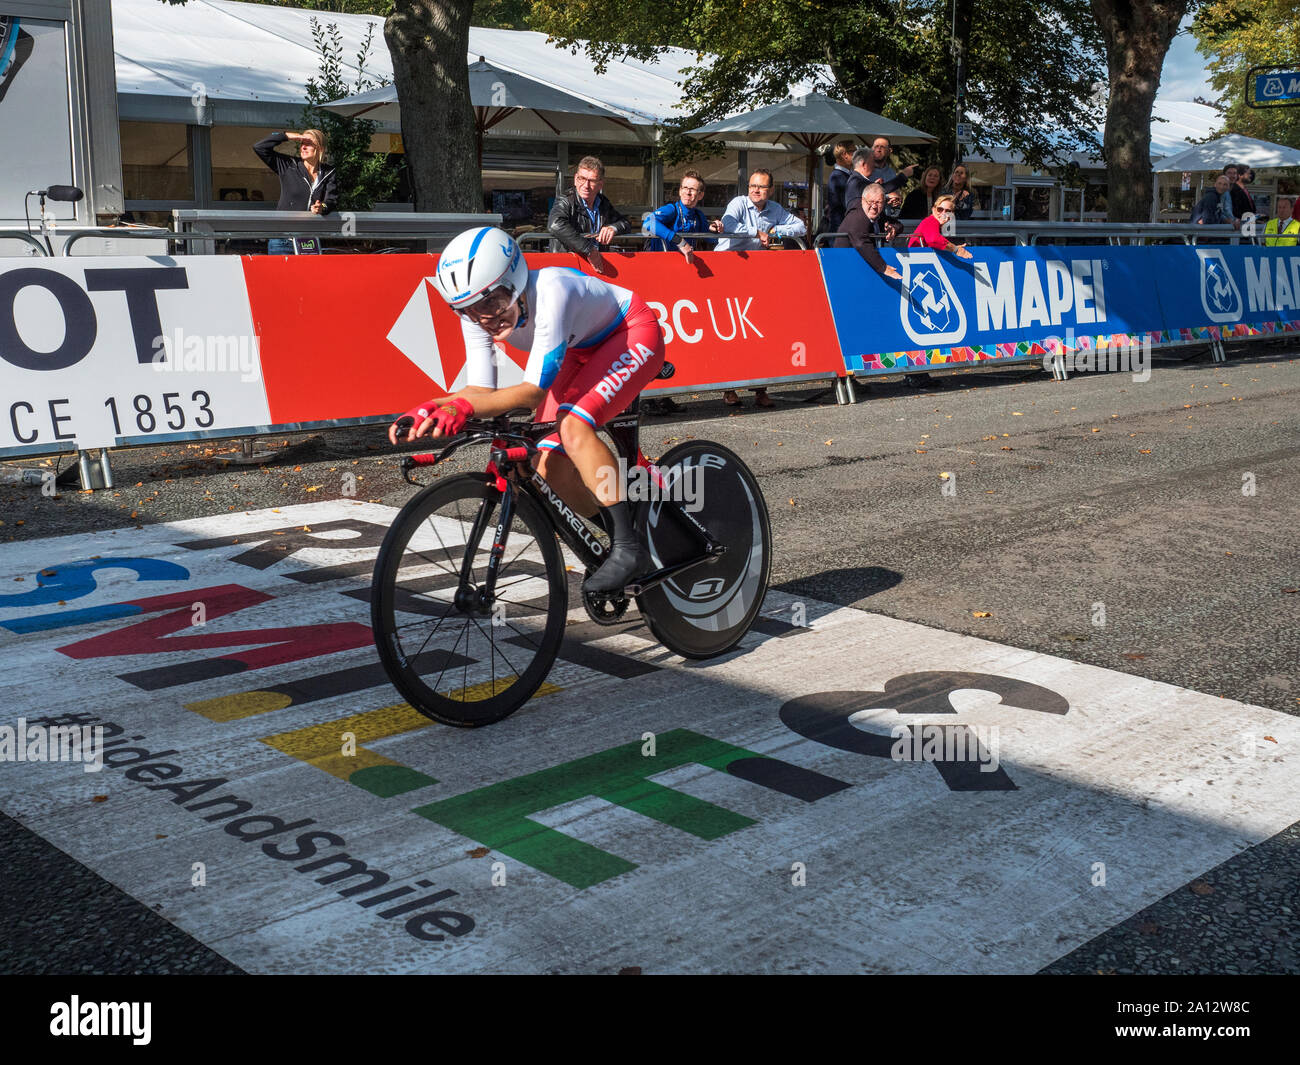 Aigul Gareeva of Russia taking the gold medal in the Womens Junior Individual Time Trial at the Yorkshire 2019 UCI Road World Championships at Harrogate North Yorkshire England Stock Photo